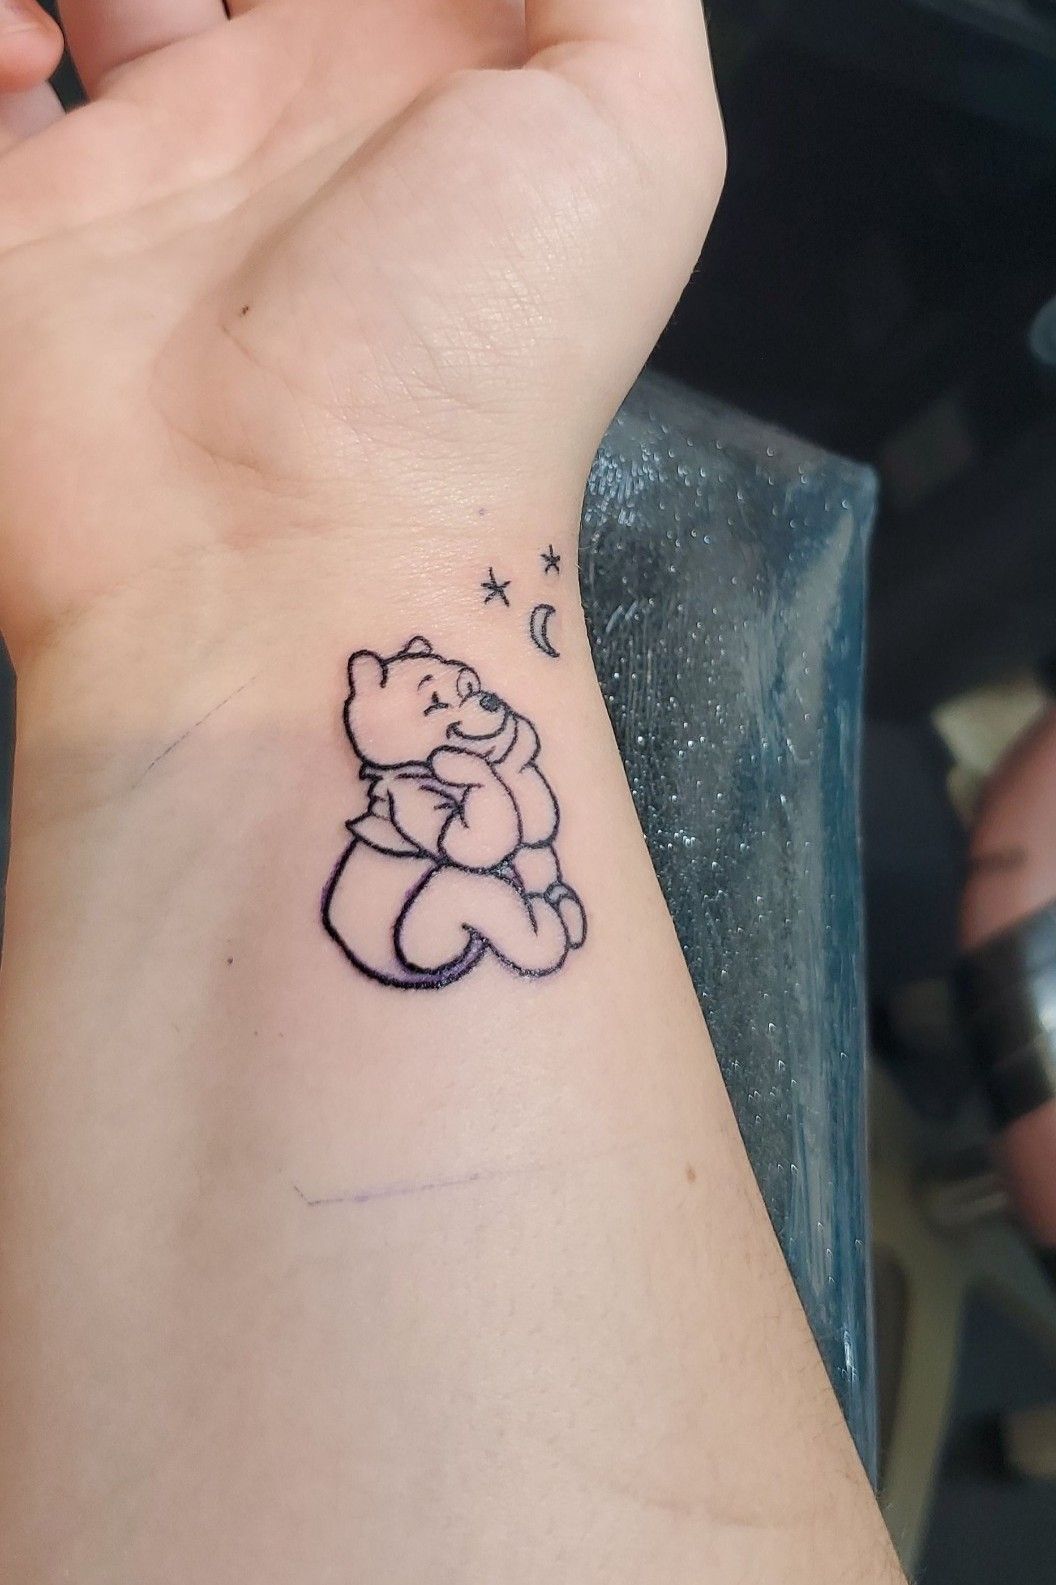 Sometimes the smallest things take the most room in your heart  Winnie the  Pooh  winniethepooh quo  Disney tattoos small Minimalist tattoo  Finger tattoos